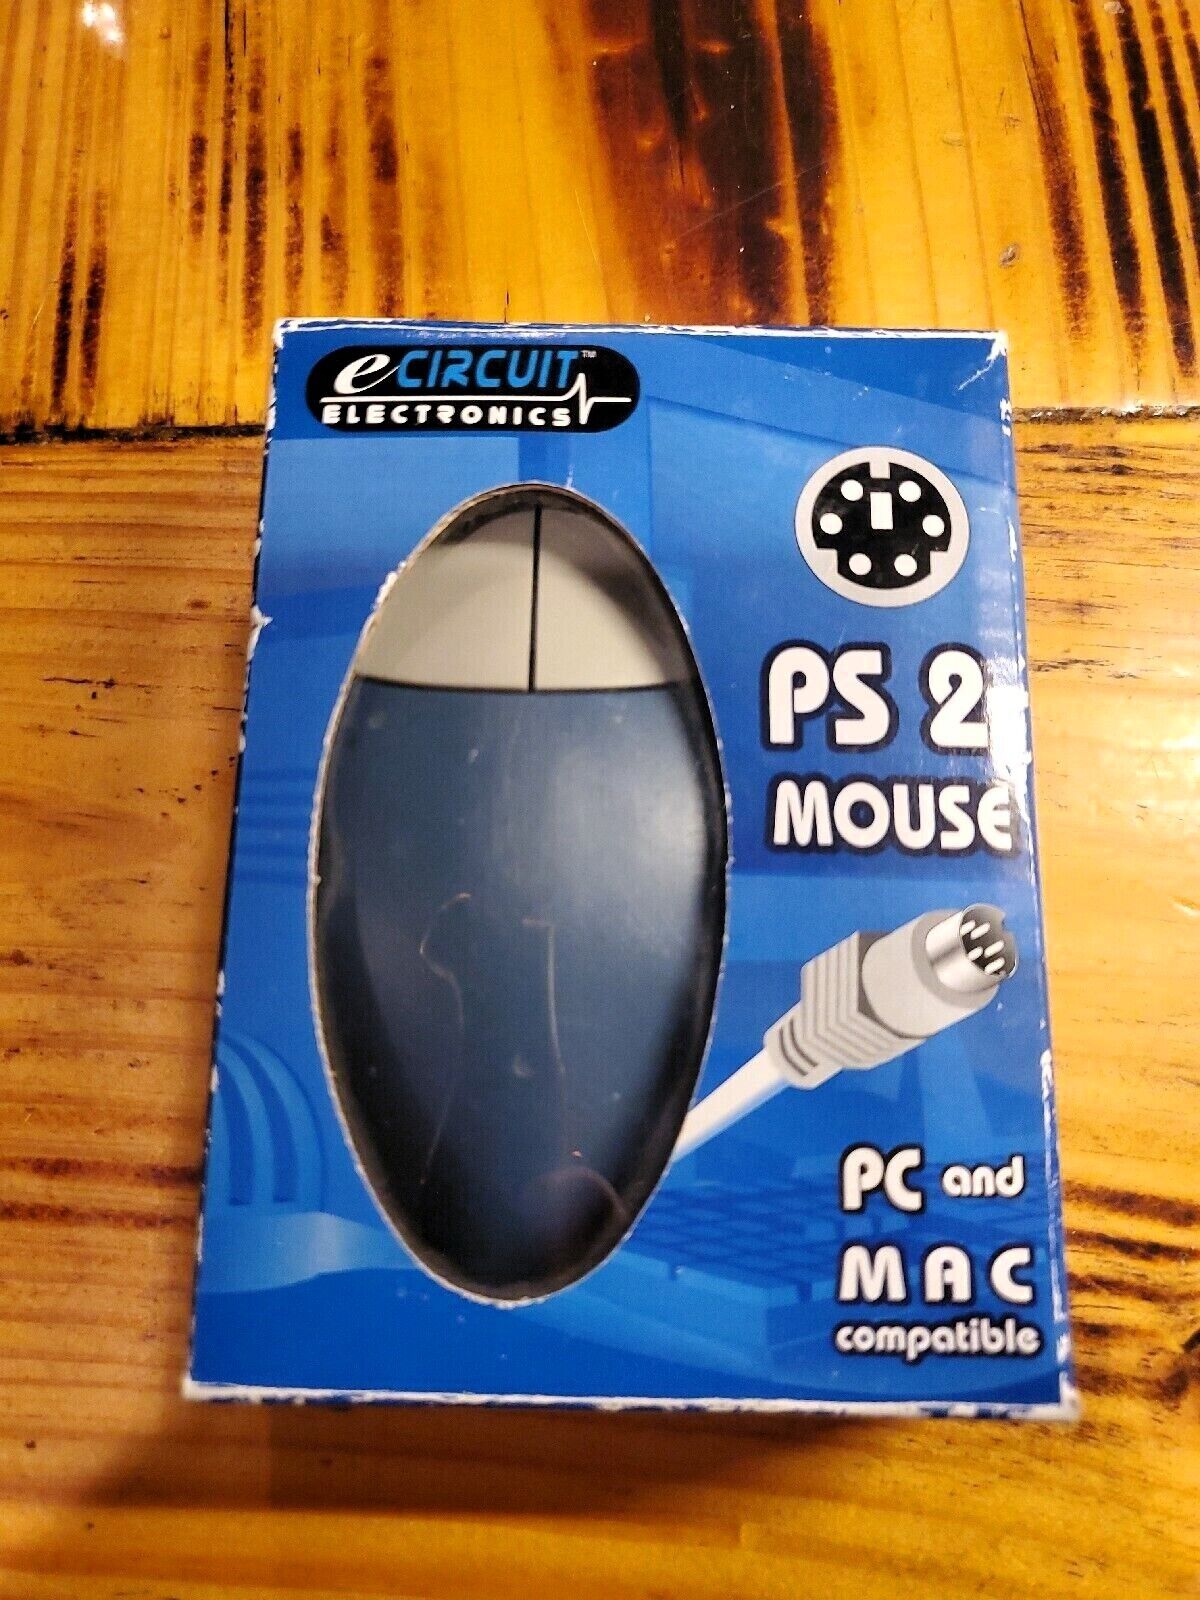 New Old Stock Vintage PS2 Mouse E Circuit Electronics PC & Mac Model #861829